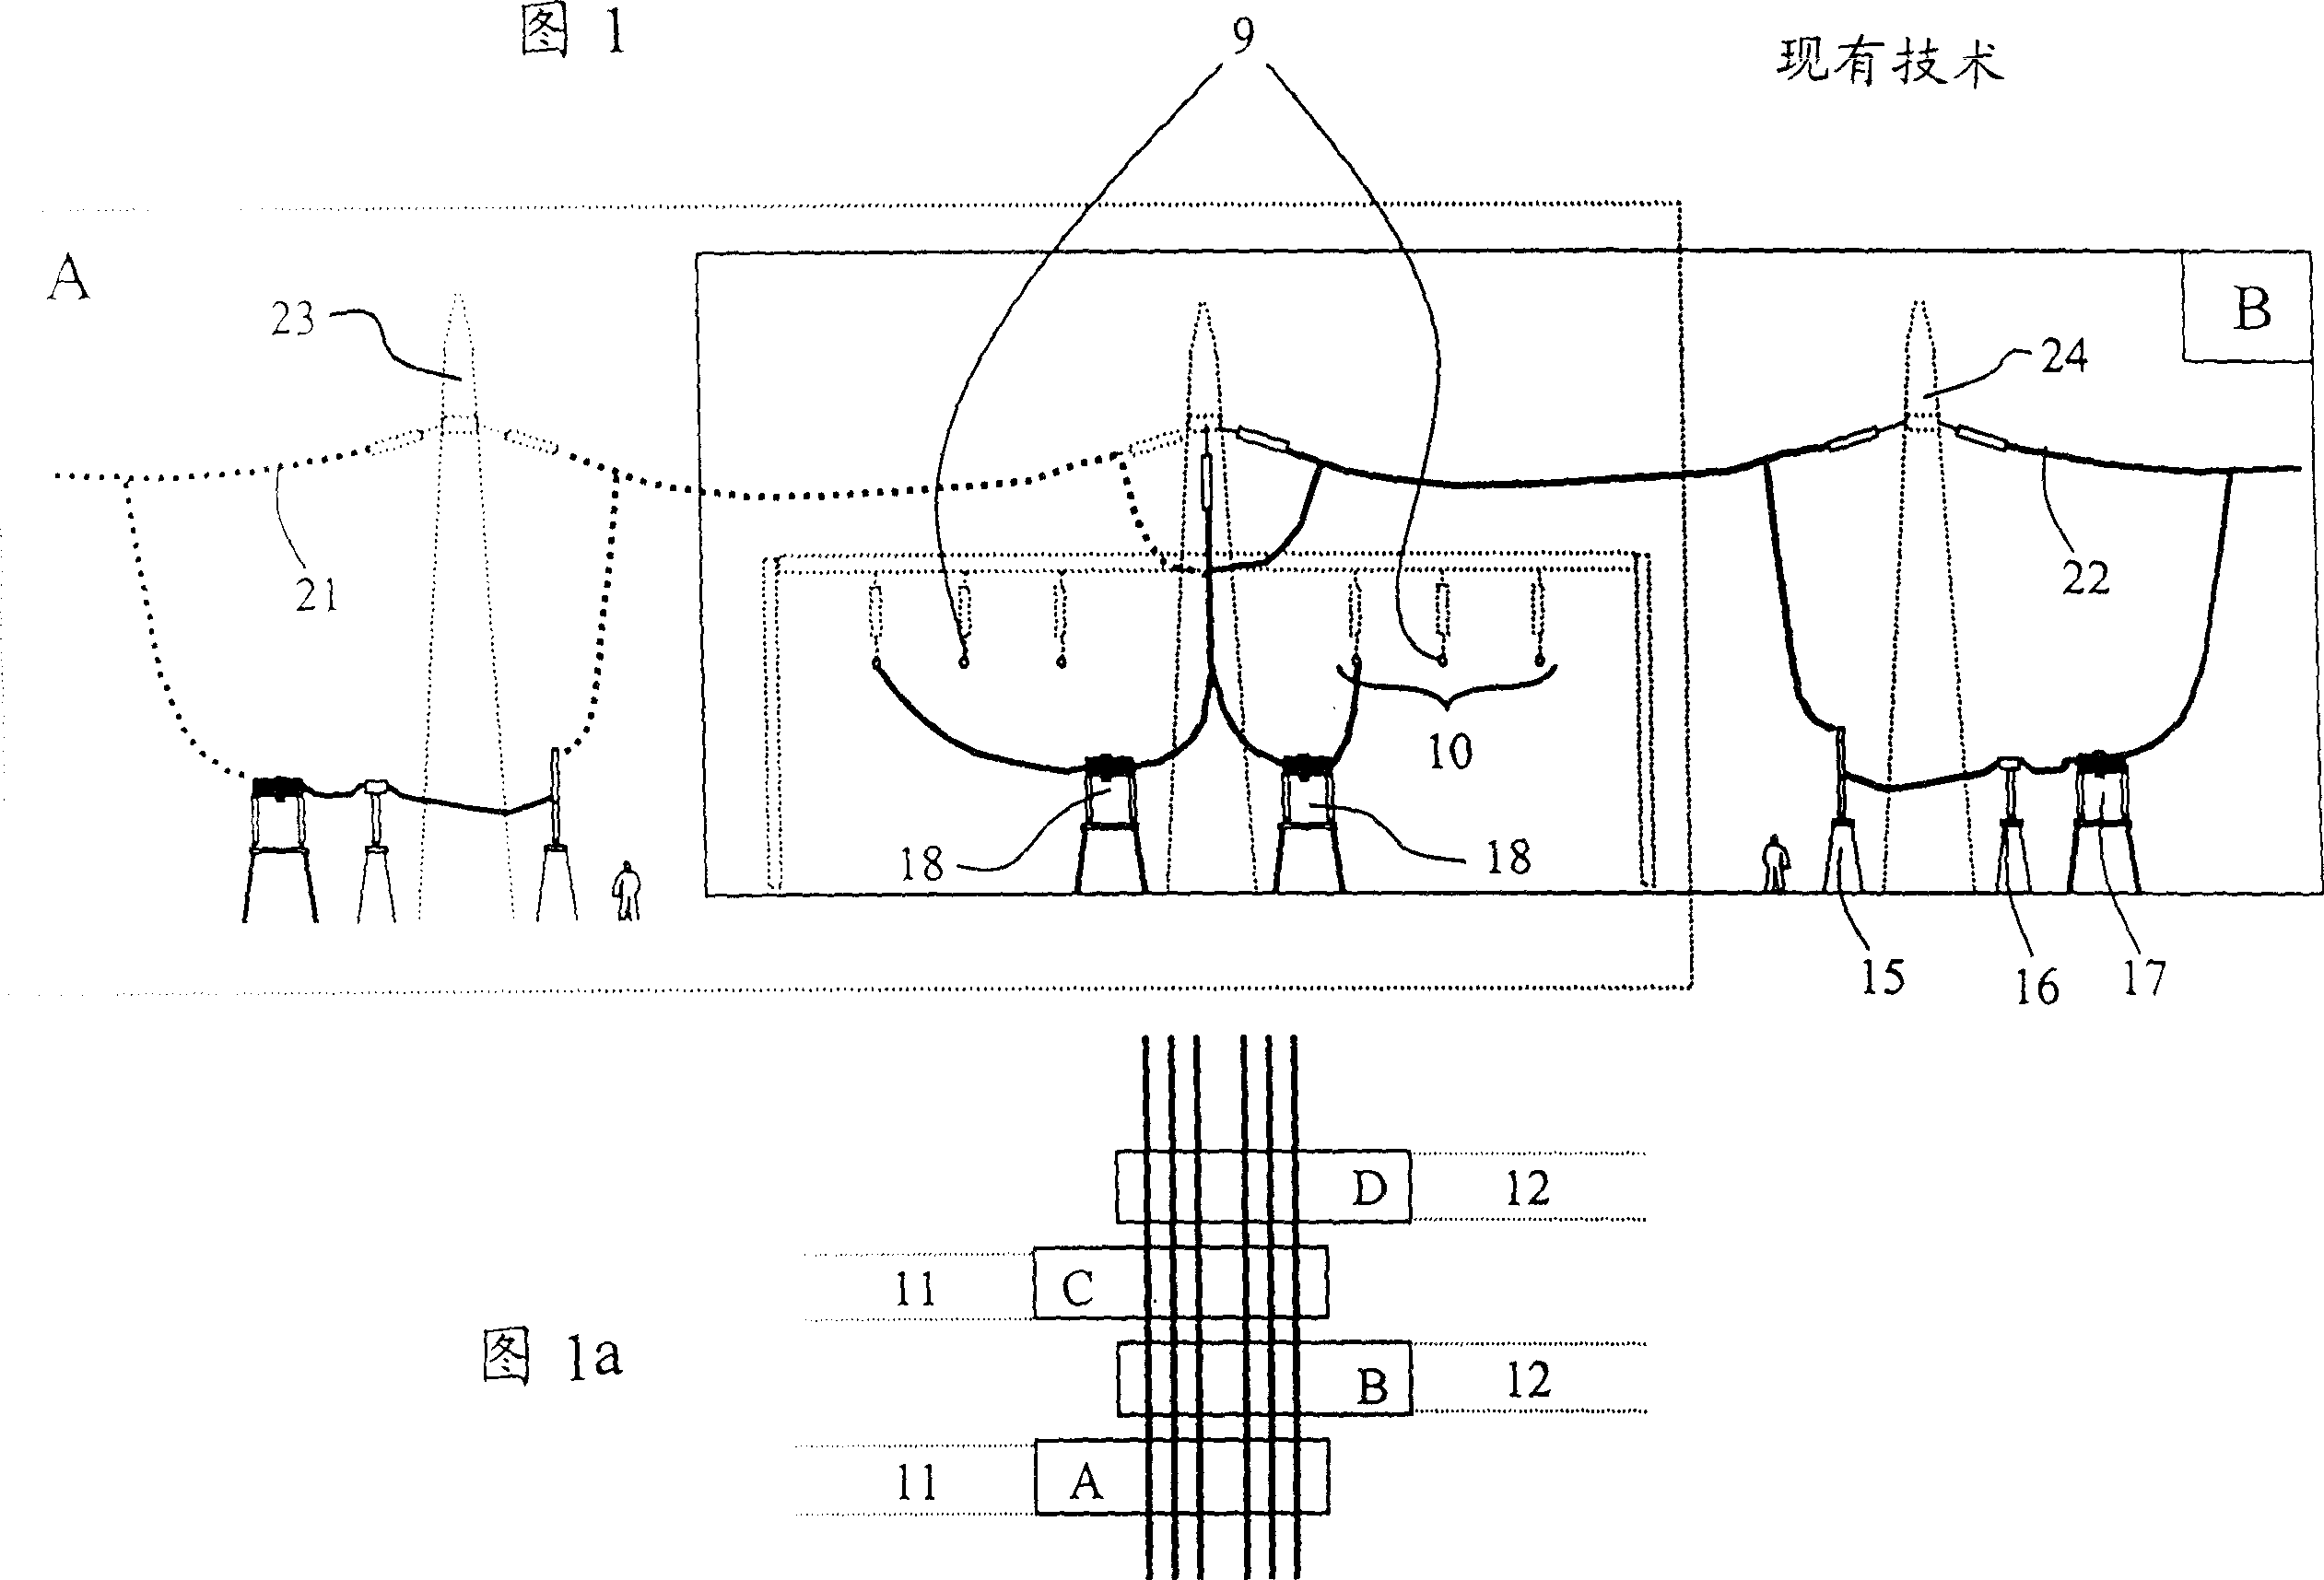 High voltage hybridstation with opposite busbars and shielded cutoff and switching modules for same